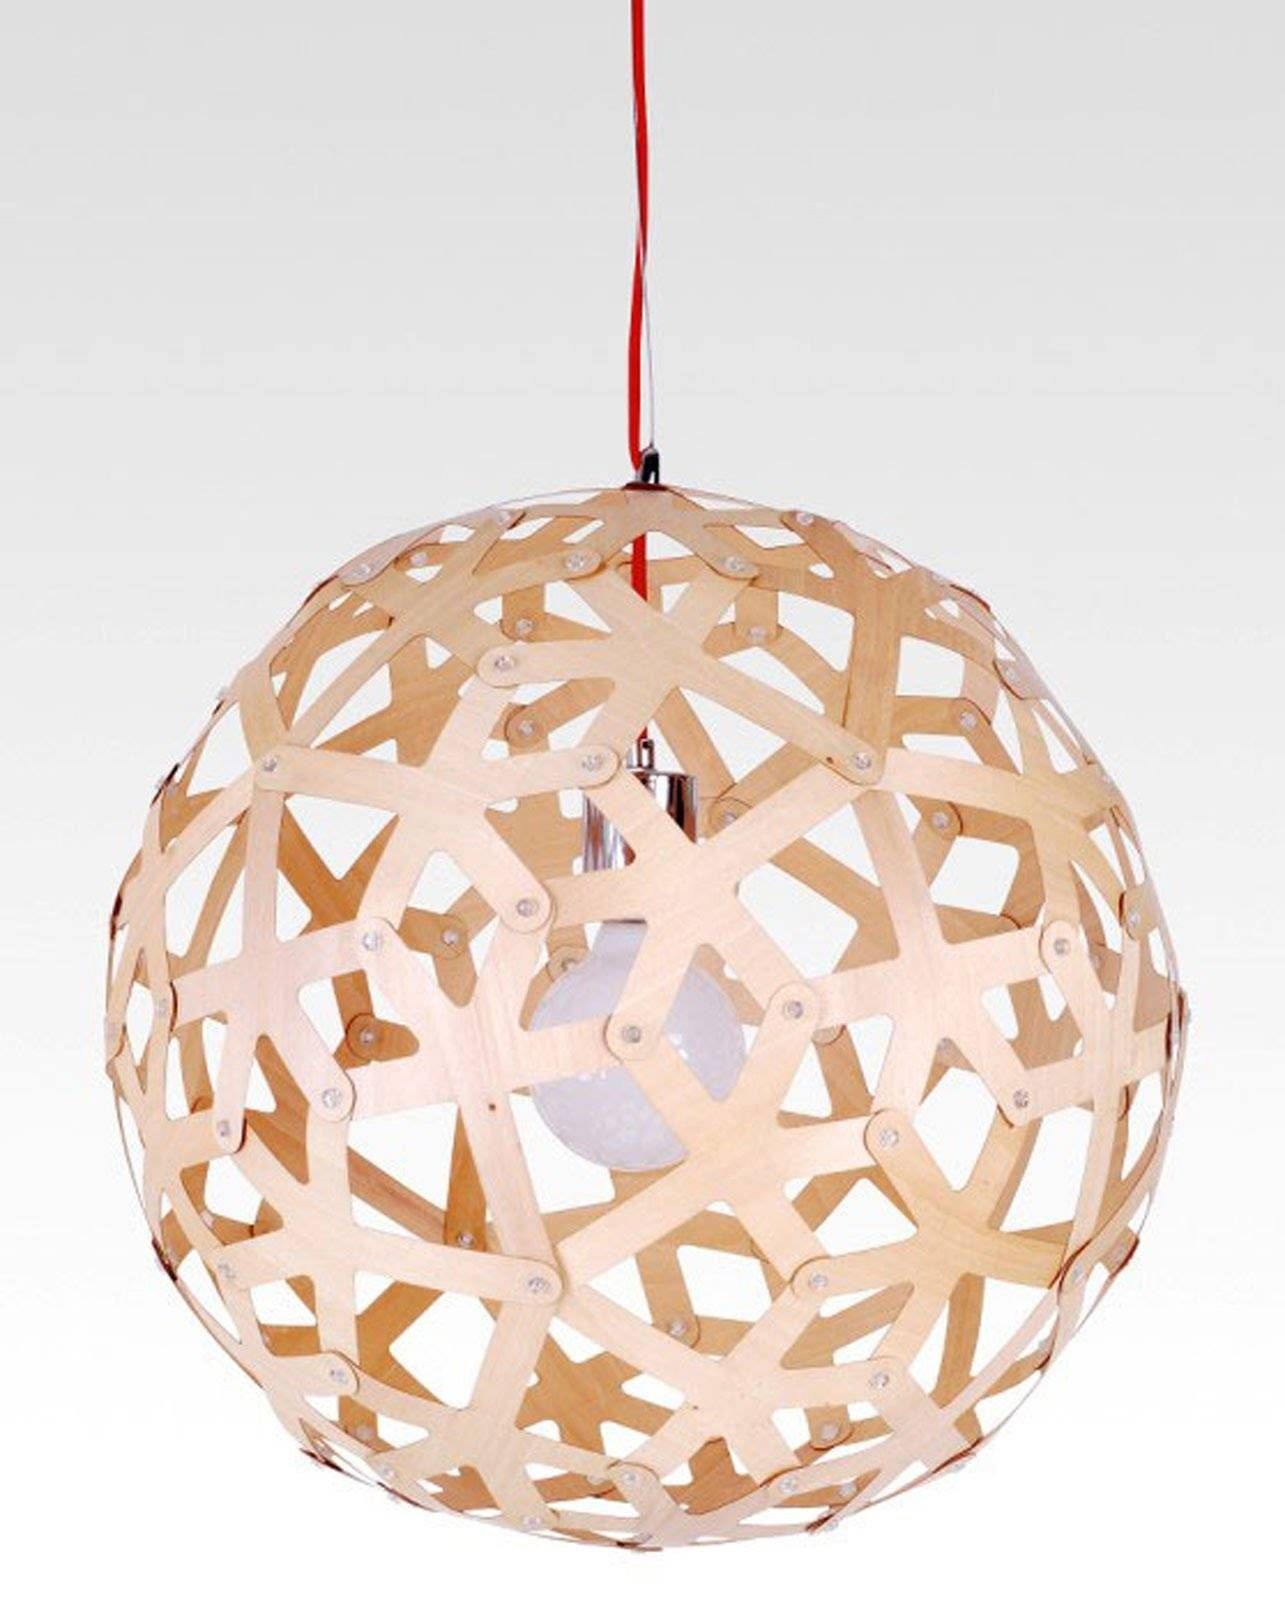 Buy Wood Pendant Light In Melbourne [sphere] – Youtube With Regard To Wooden Pendant Lights (View 11 of 15)